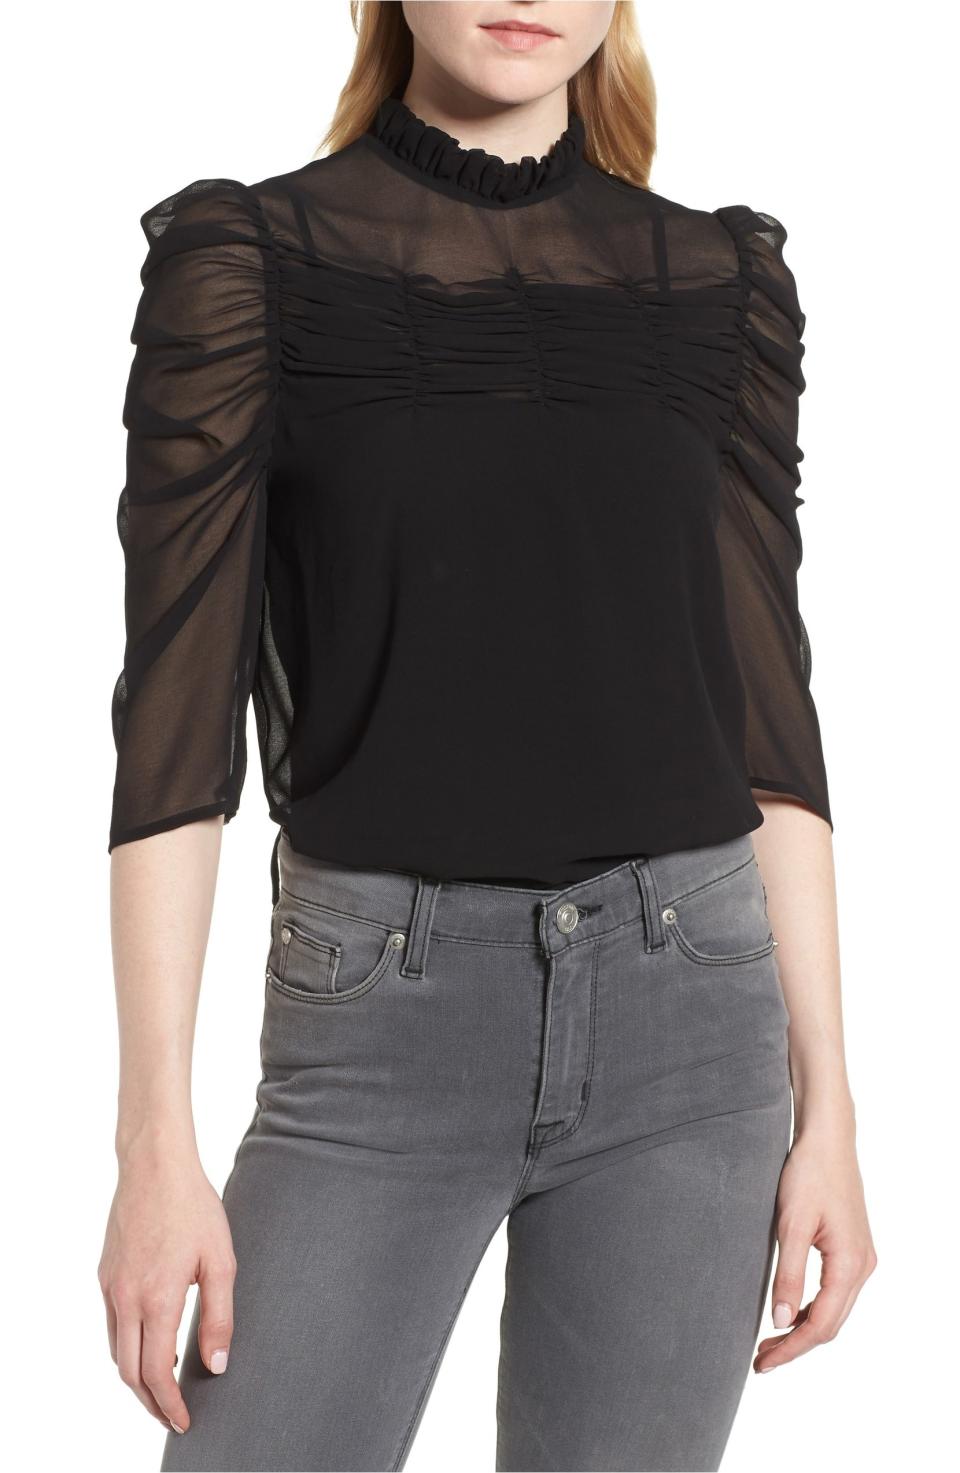 Chelsea28 Shirred Ruffle Neck Top, $69 $45.90, Nordstrom